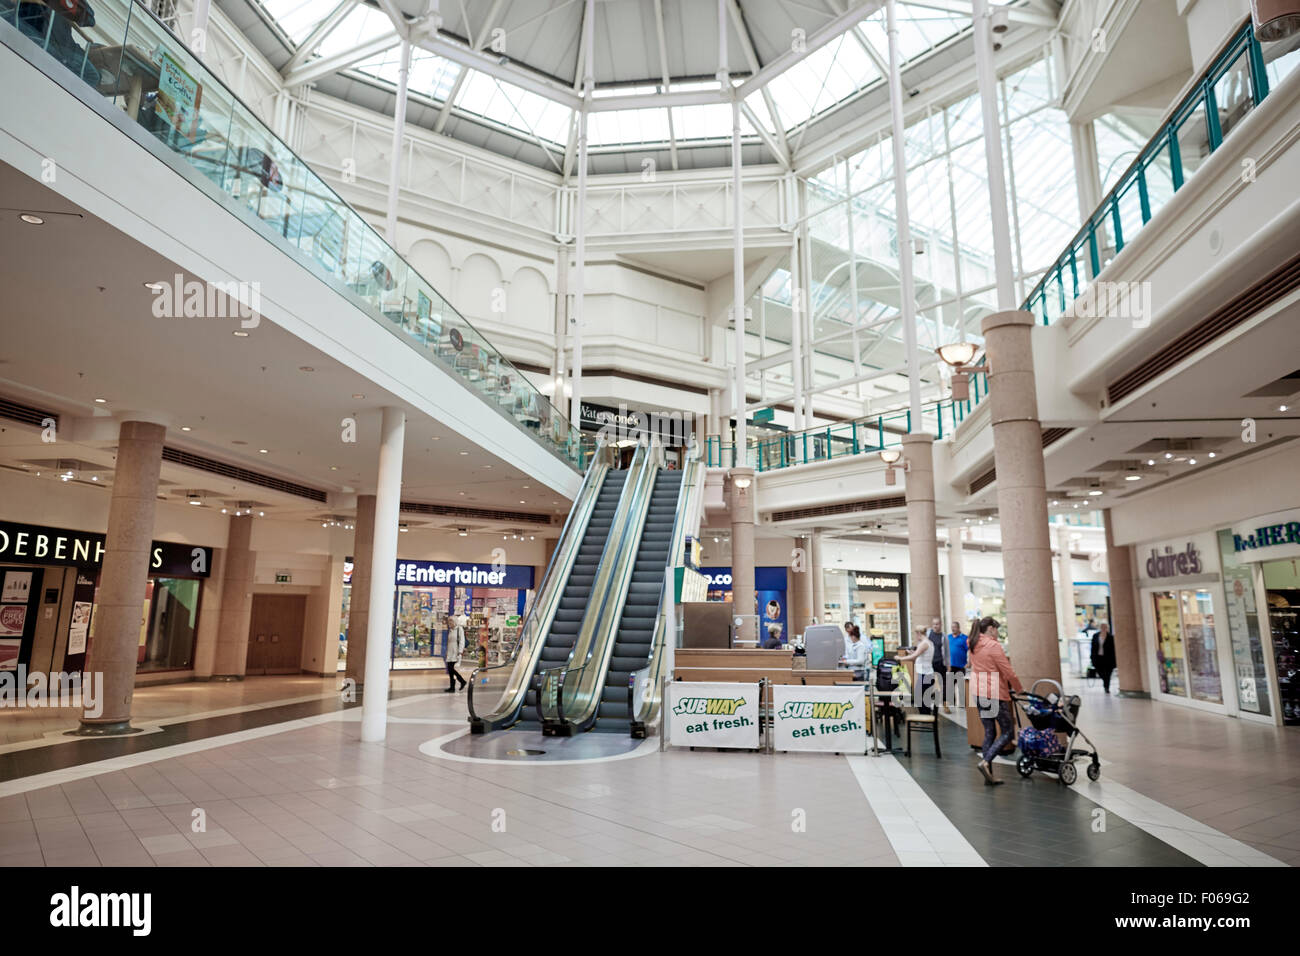 Spindles Town Centre Shopping Centre  Escalators lady mum pram pushing ornate features atrium  glass interior Covered mall with Stock Photo